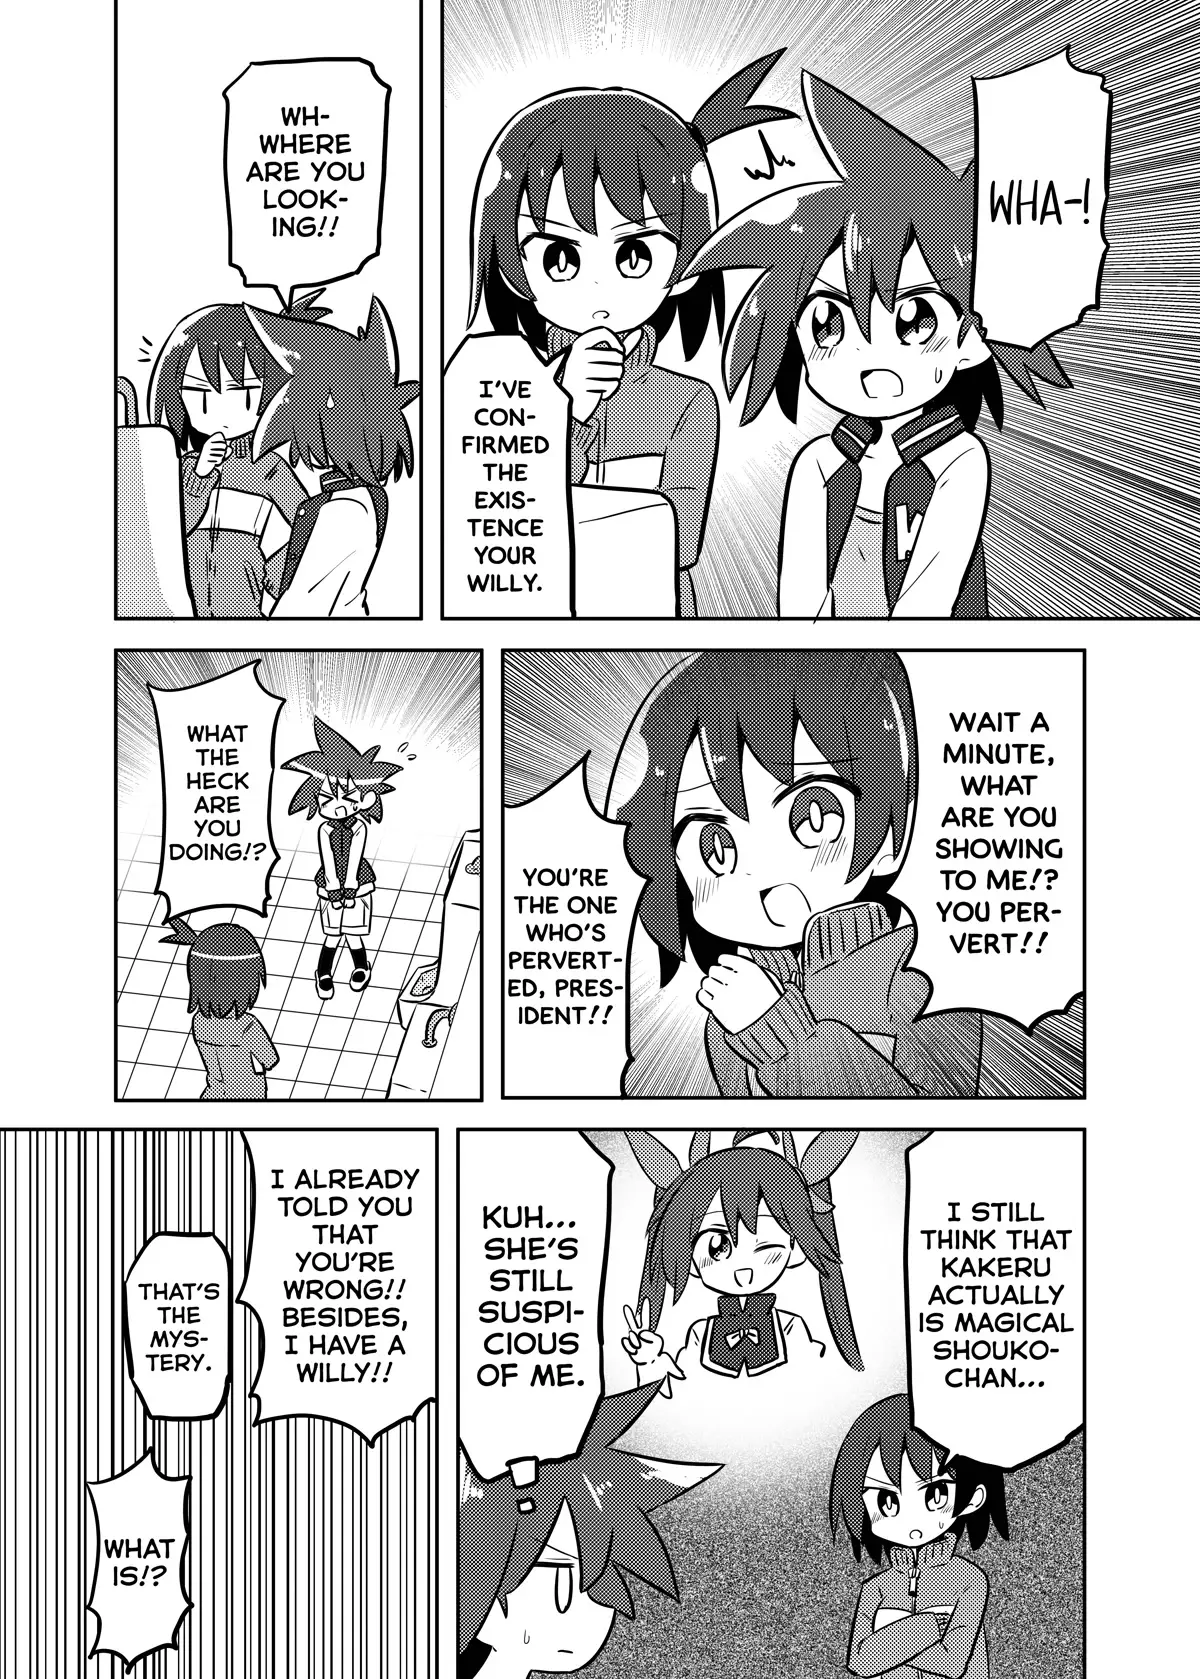 Magical Girl Sho - 26 page 2-76386d97